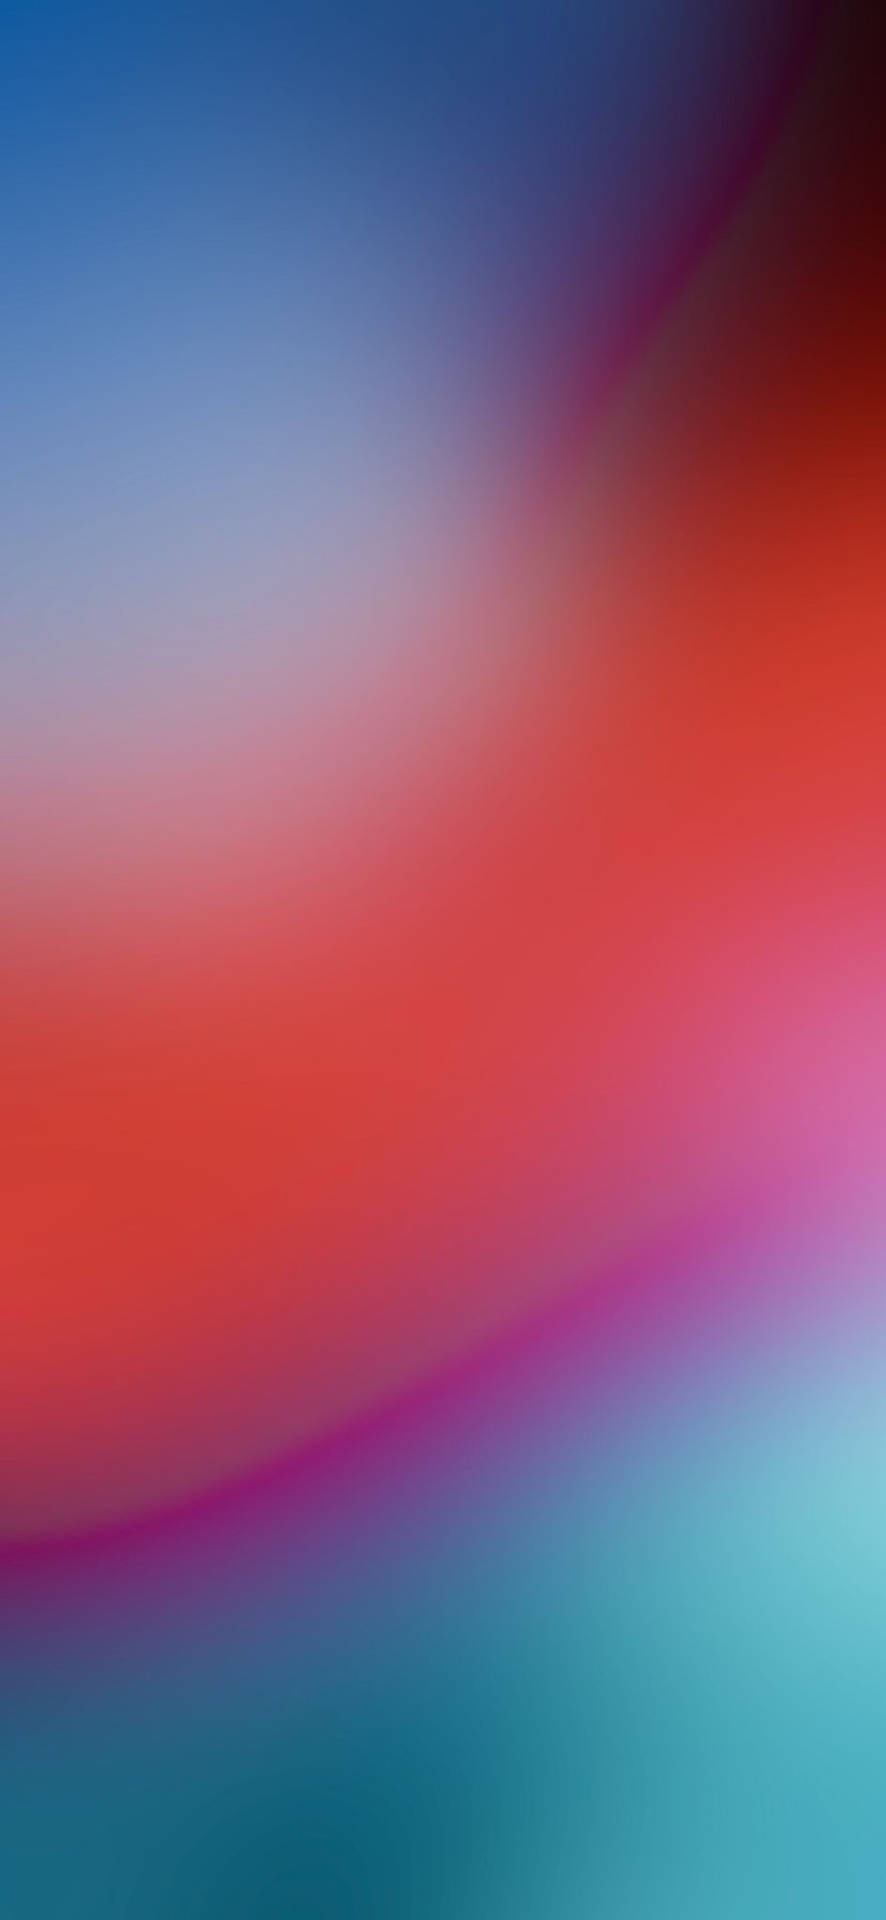 Iphone 12 Stock Red Blue Blur Background